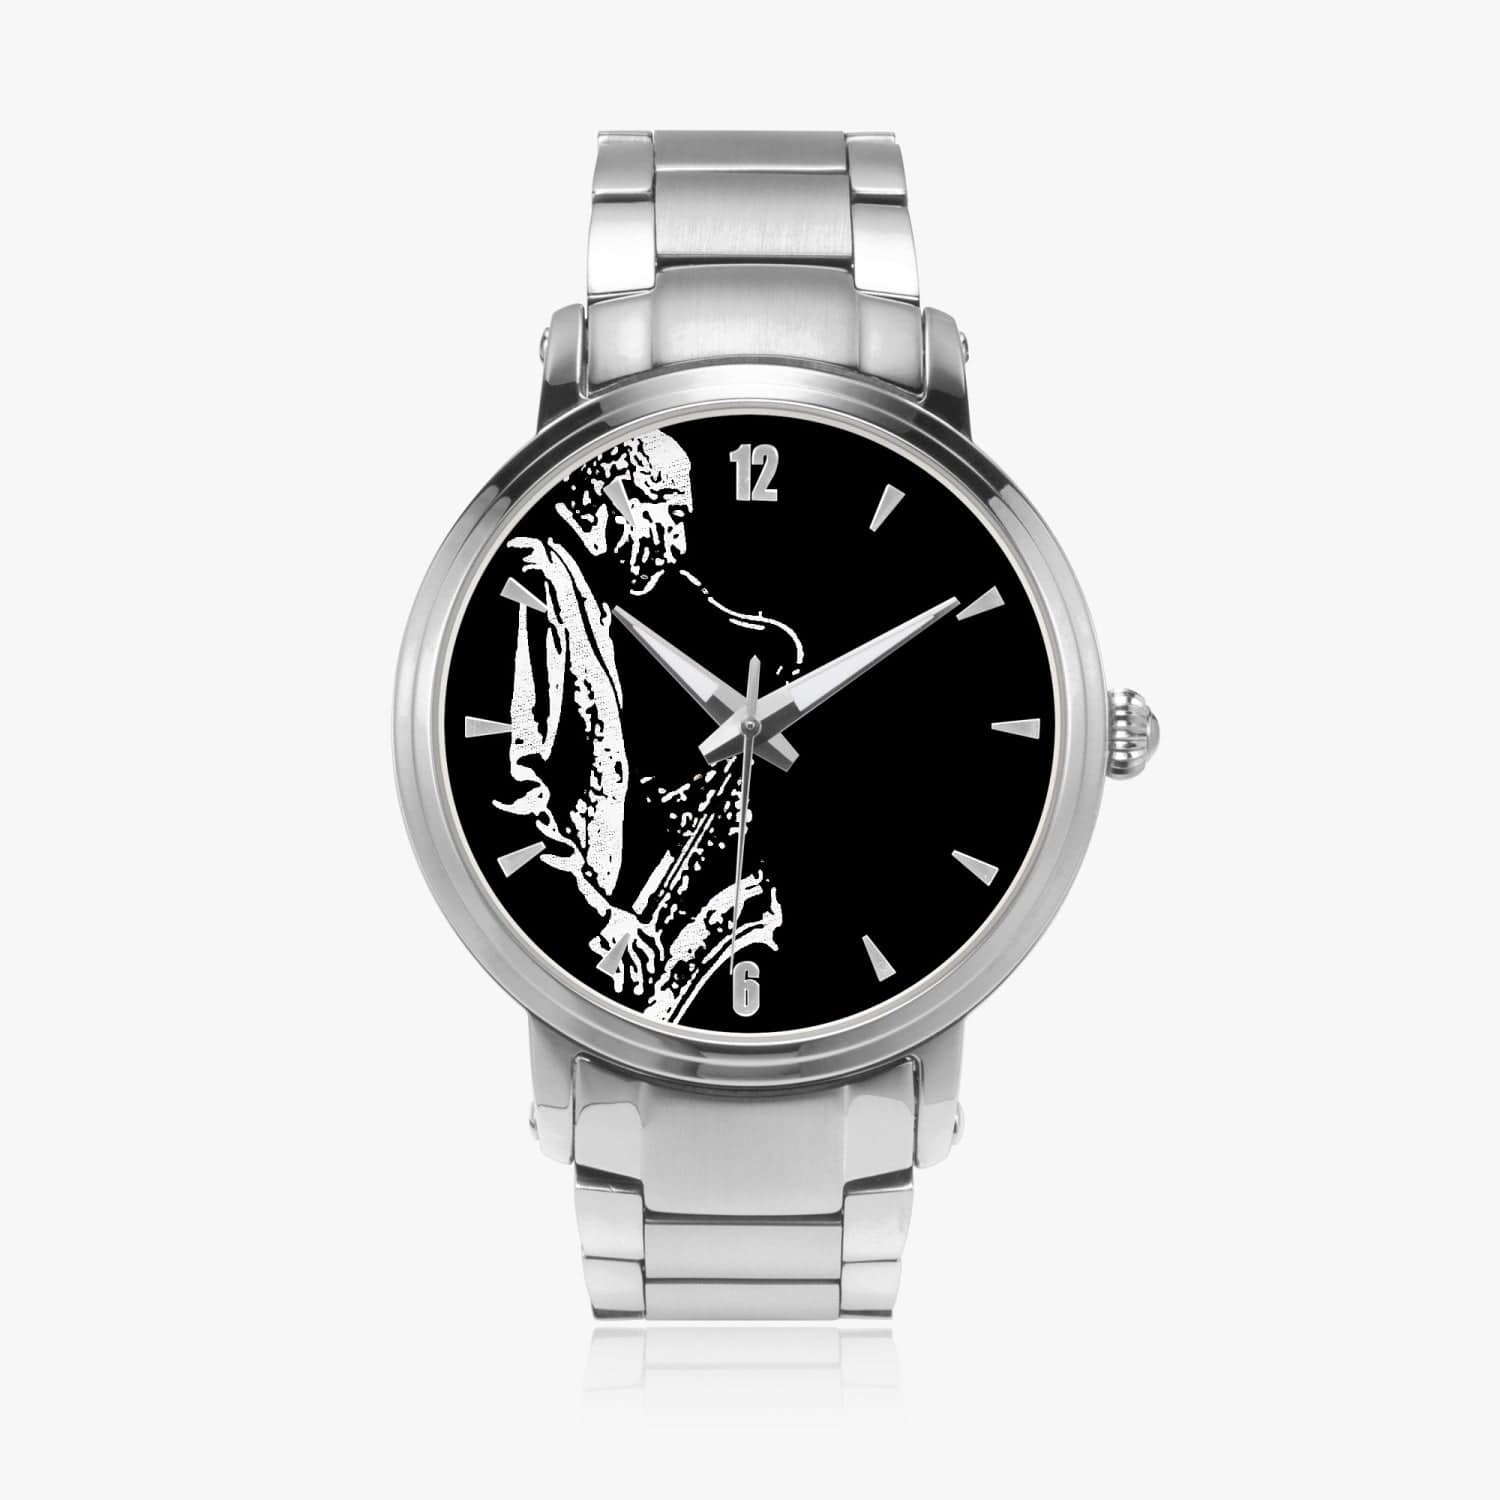 Sax Player. New Steel Strap Automatic Watch (With Indicators) Designer watch by Humphrey Isselt